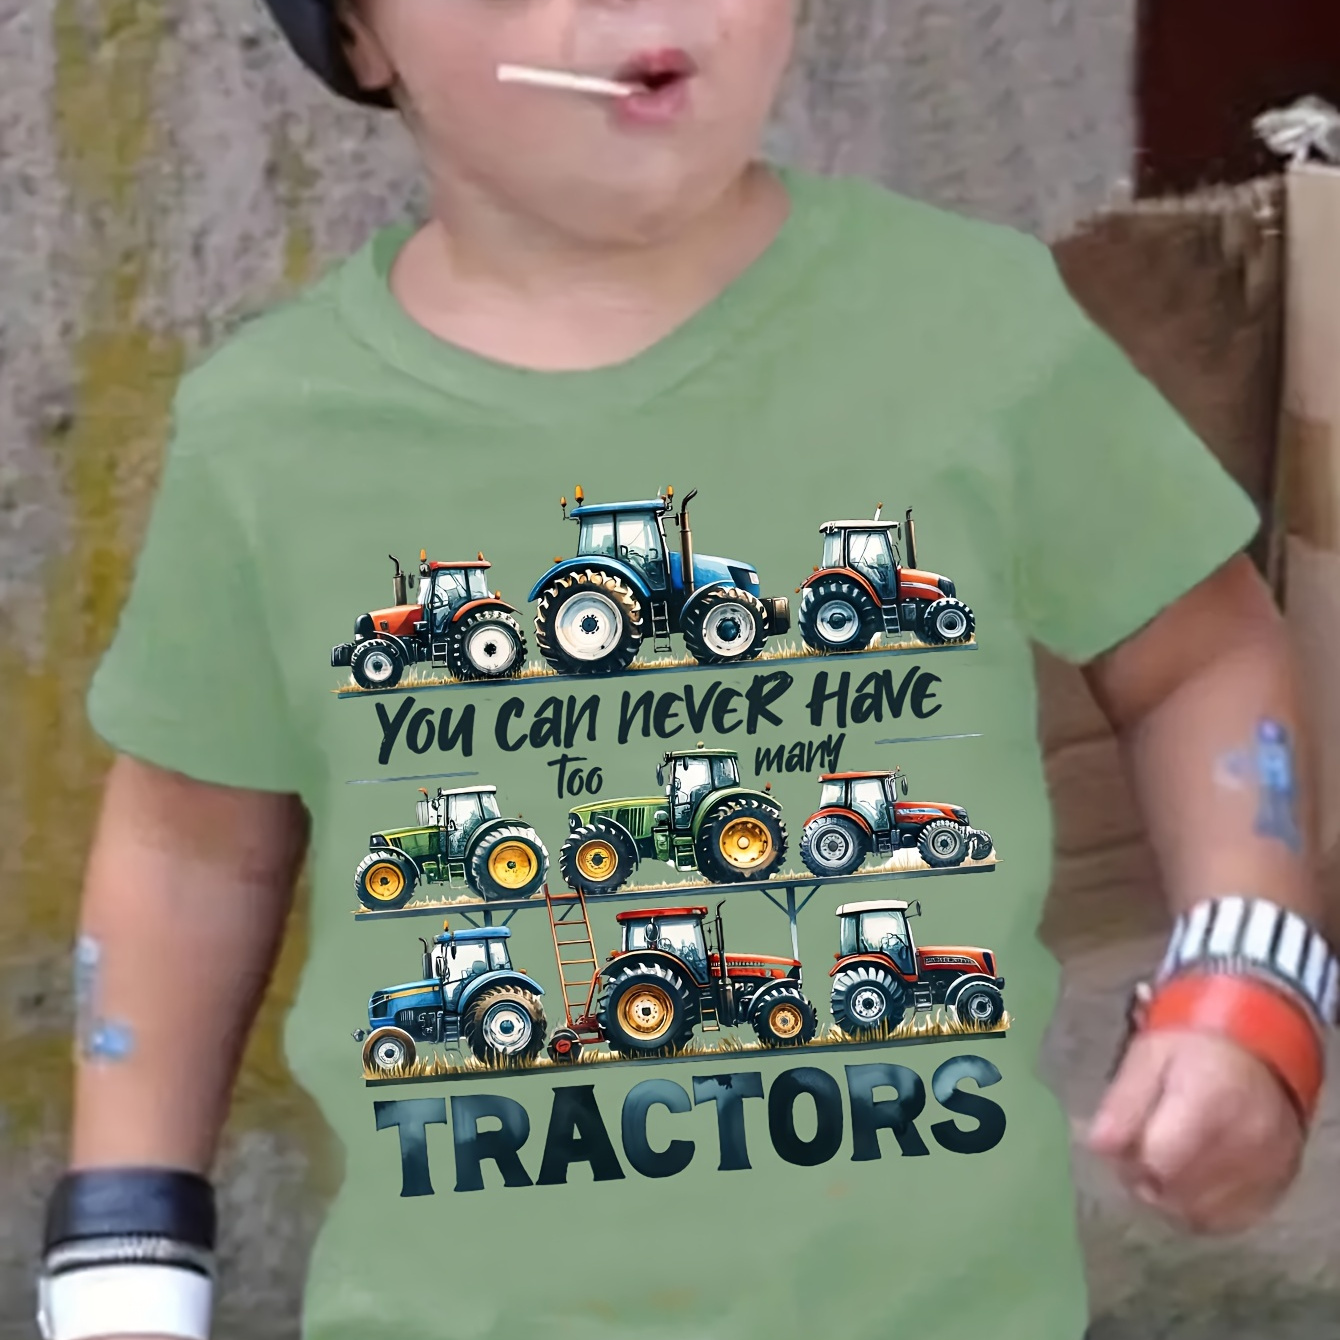 

Boys Tractors Print Short Sleeve T-shirt, Round Neck Breathable Comfortable Casual Tee Tops For Kids Children